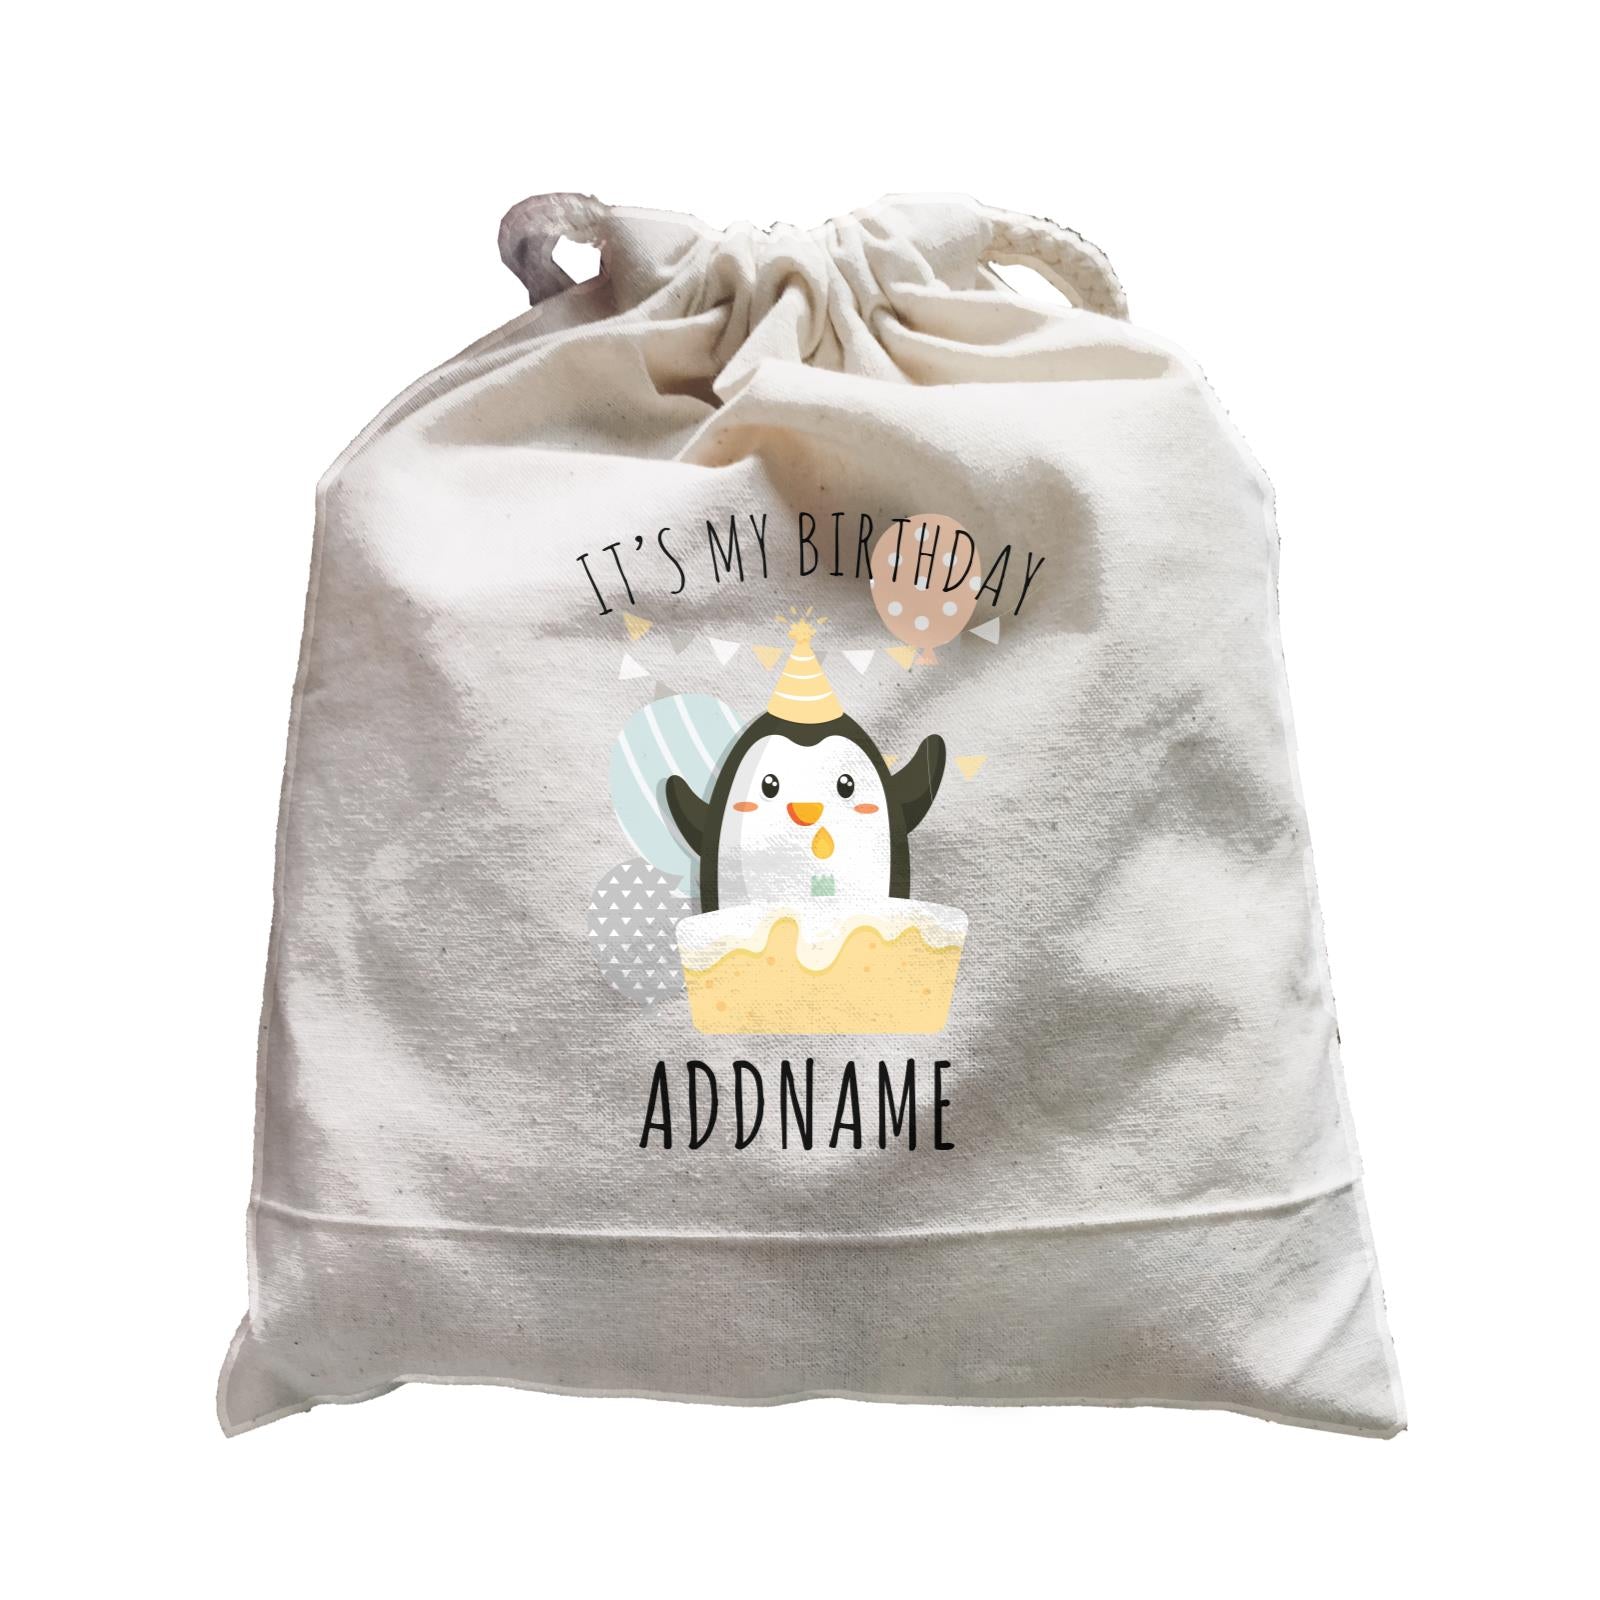 Birthday Cute Penguin And Cake It's My Birthday Addname Satchel